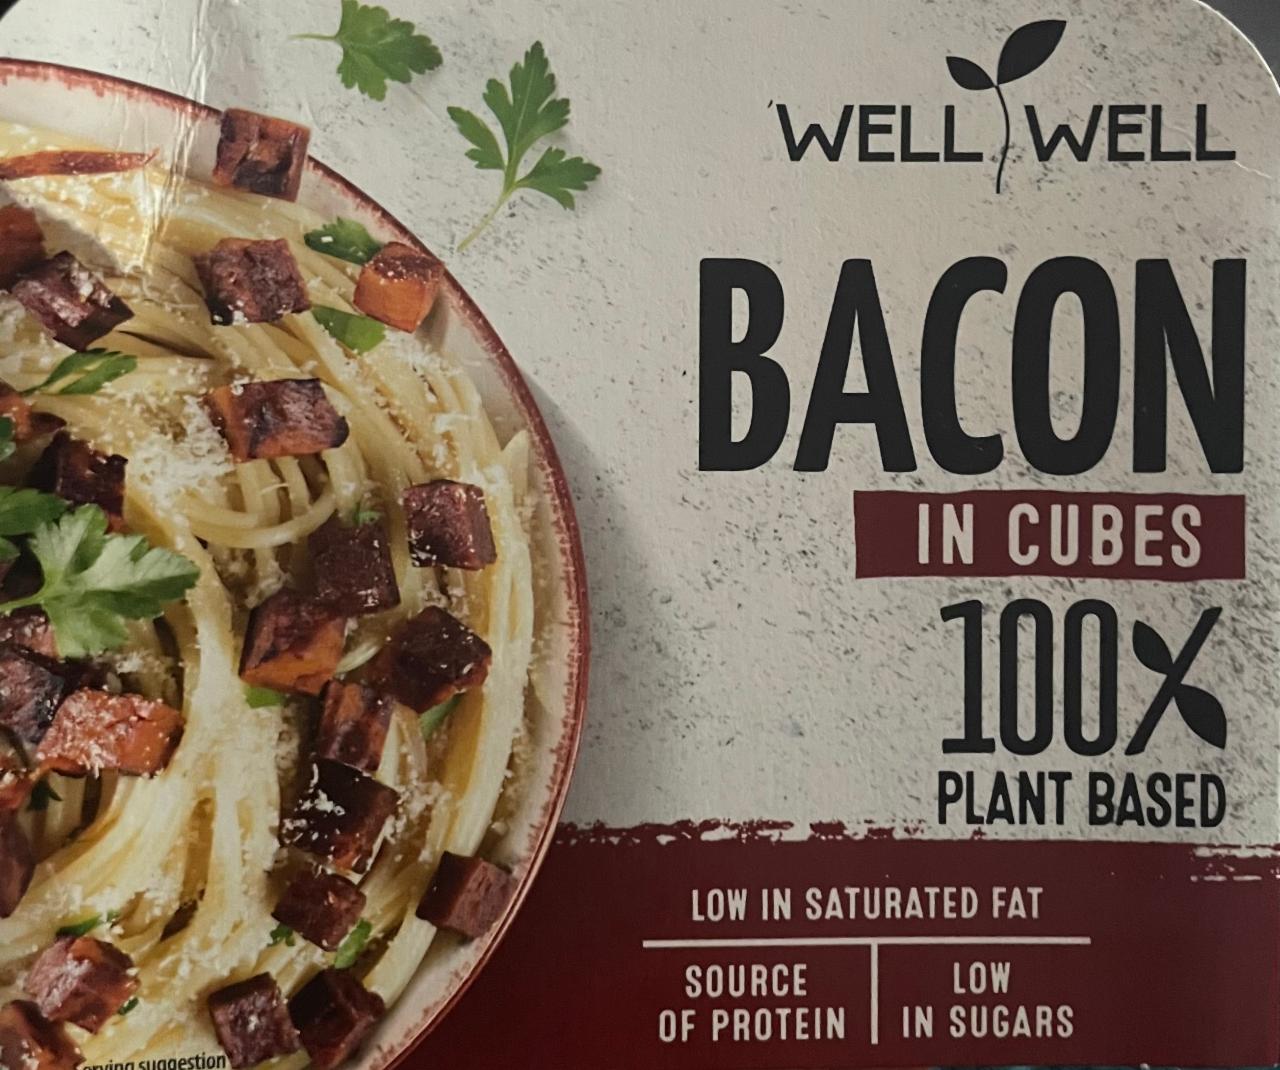 Fotografie - Bacon in Cubes 100% plant based Well Wel